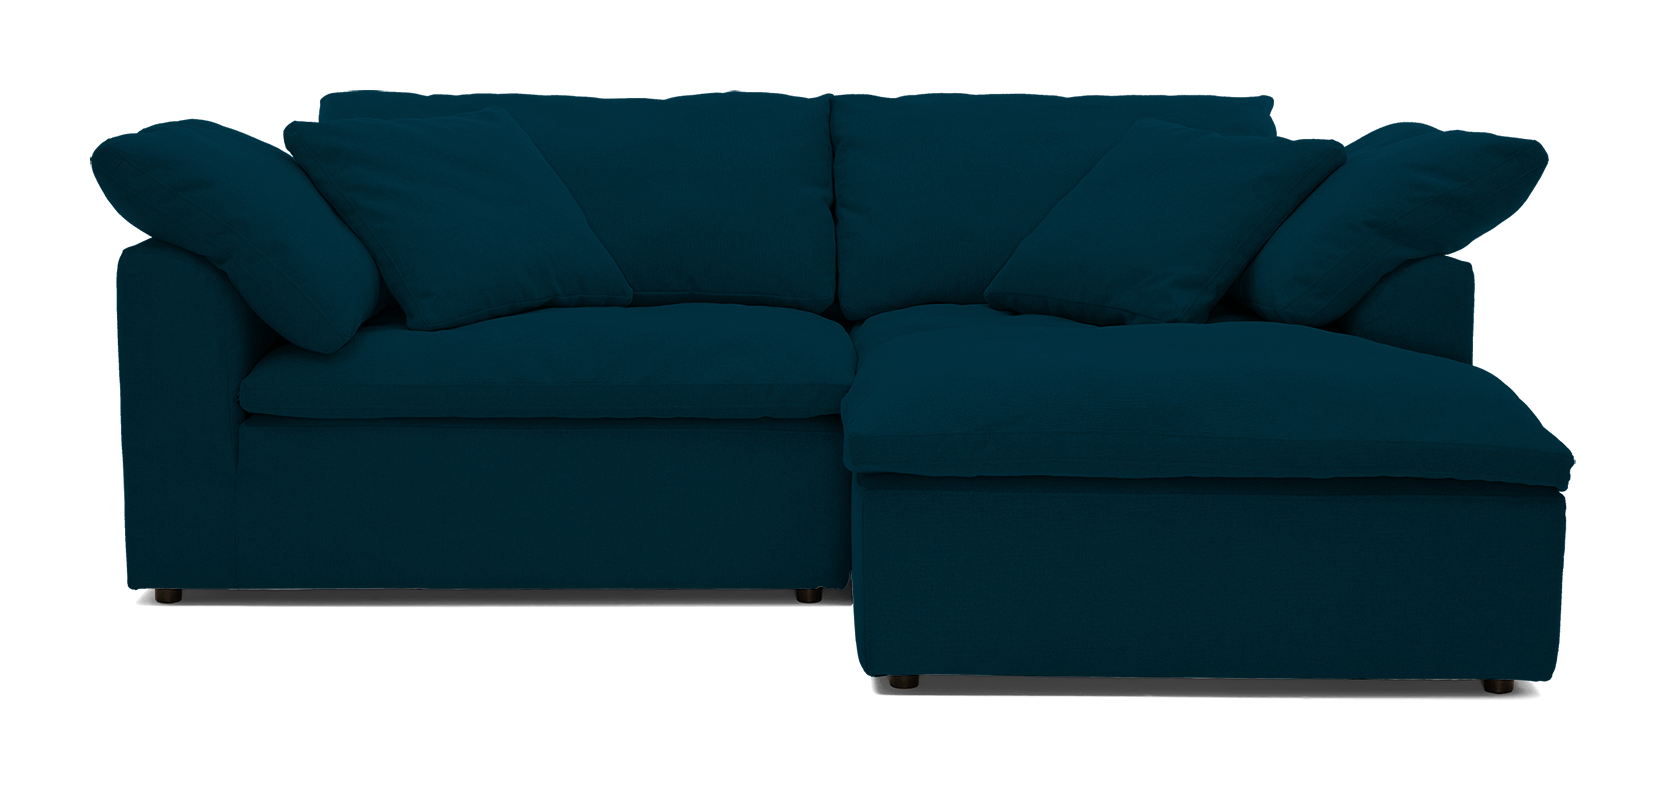 bryant modular compact double chaise sectional key largo zenith teal